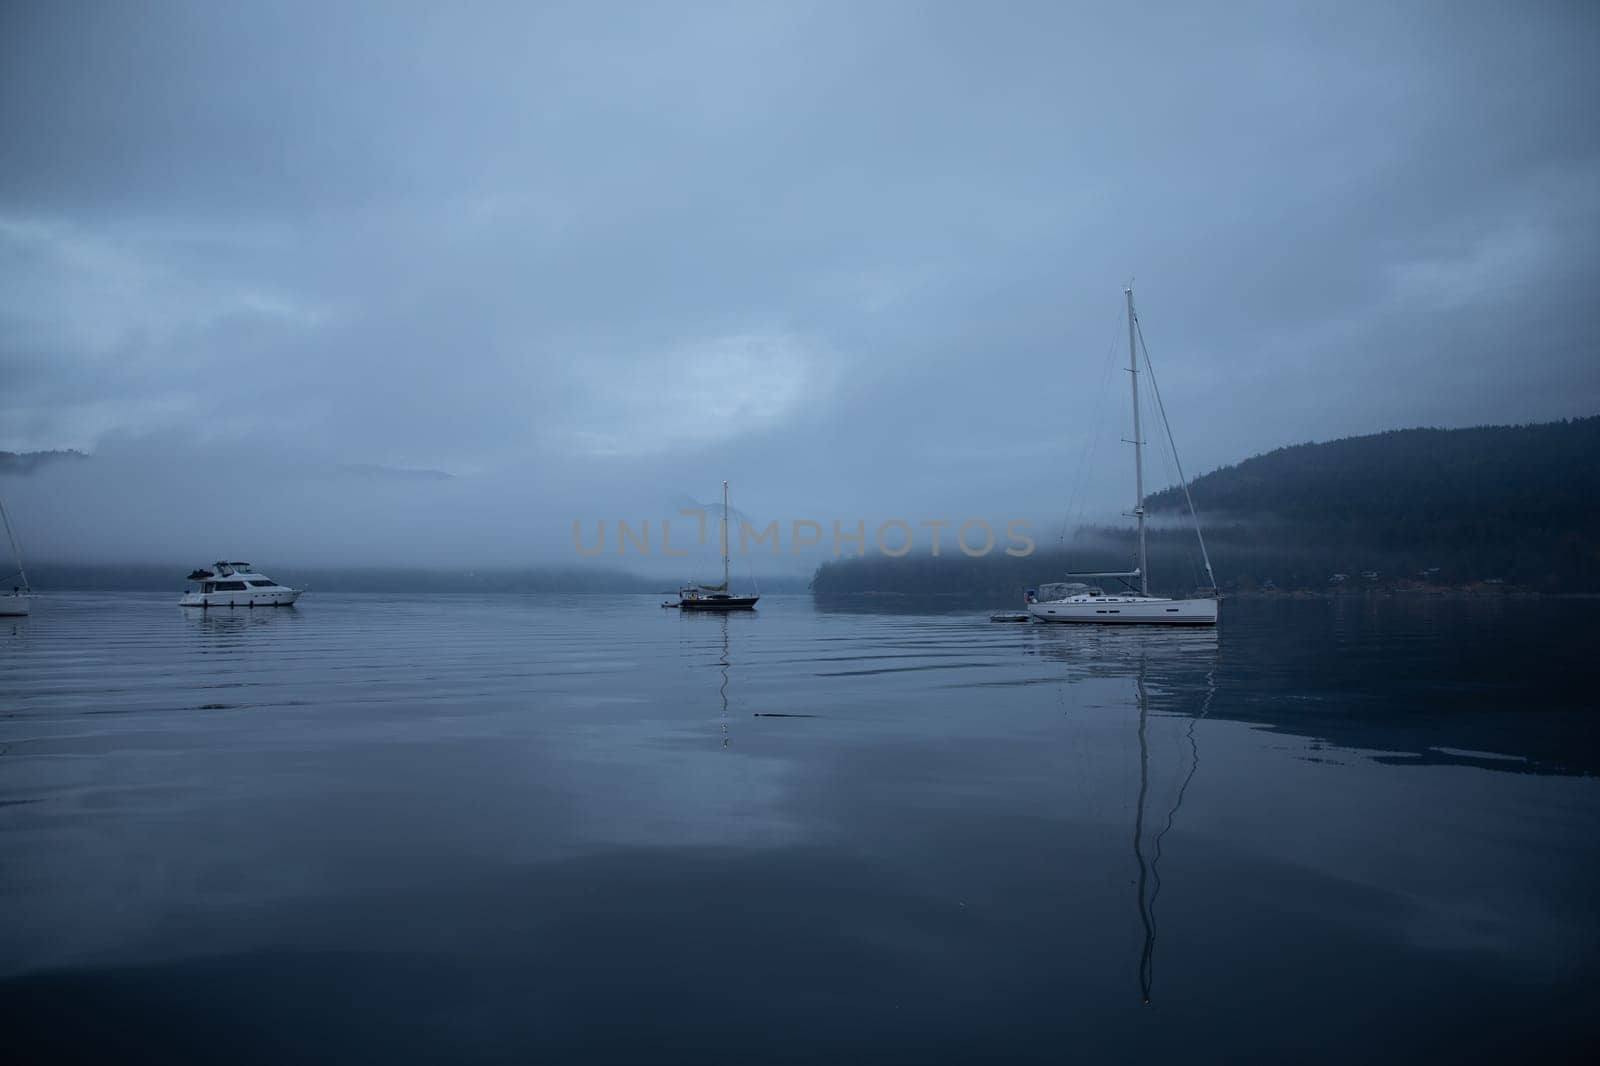 Boats anchored in a cove under dark and moody skies. Winter Cove, British Columbia